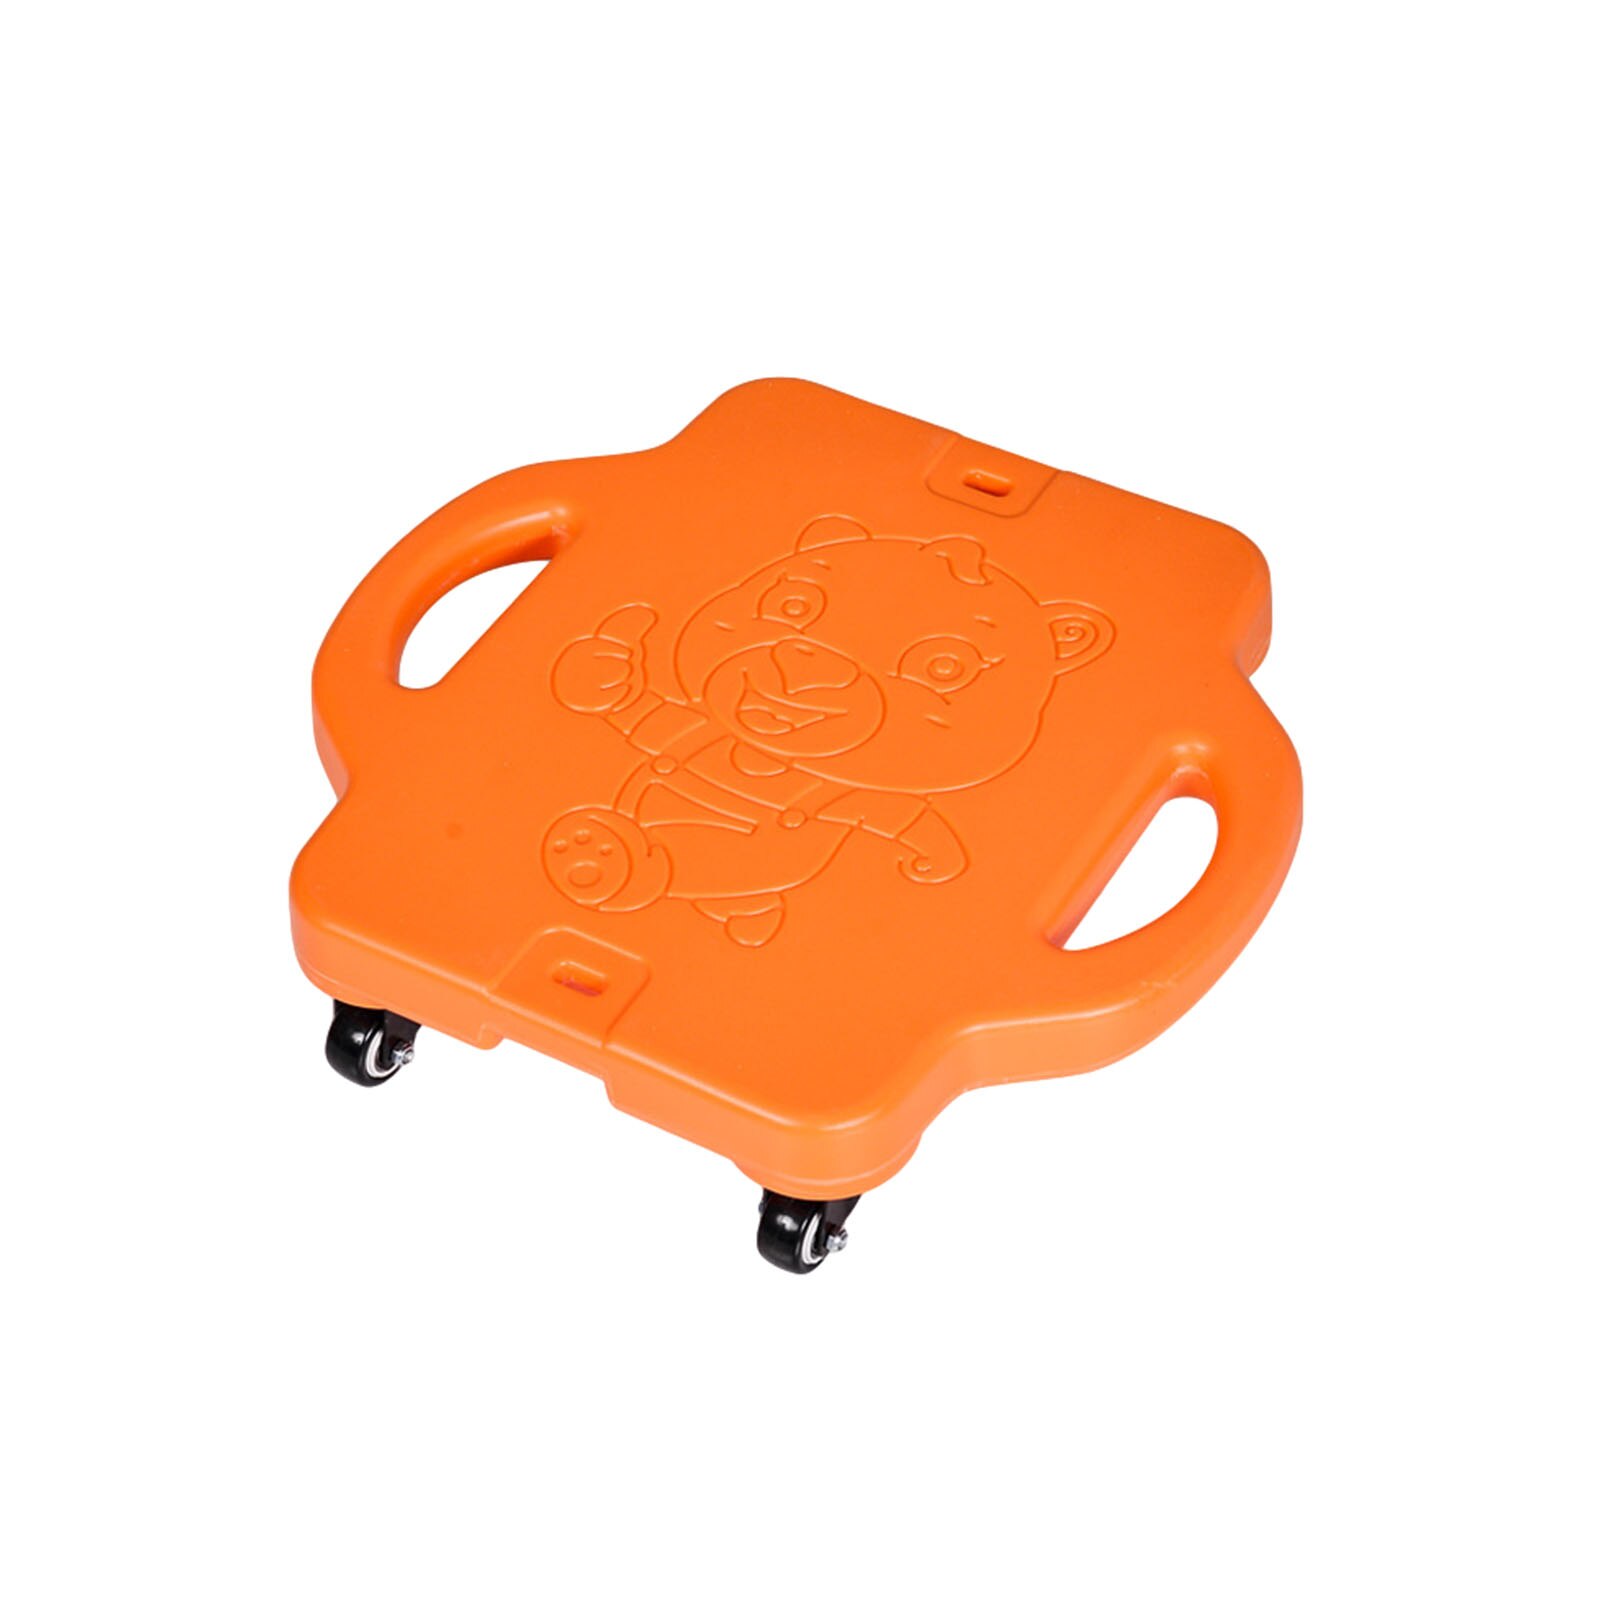 Children's Multicolor Outdoor Activities Balance Four-wheel Scooter Kids With Safety Handles Scooter Board With Casters Toy: Orange